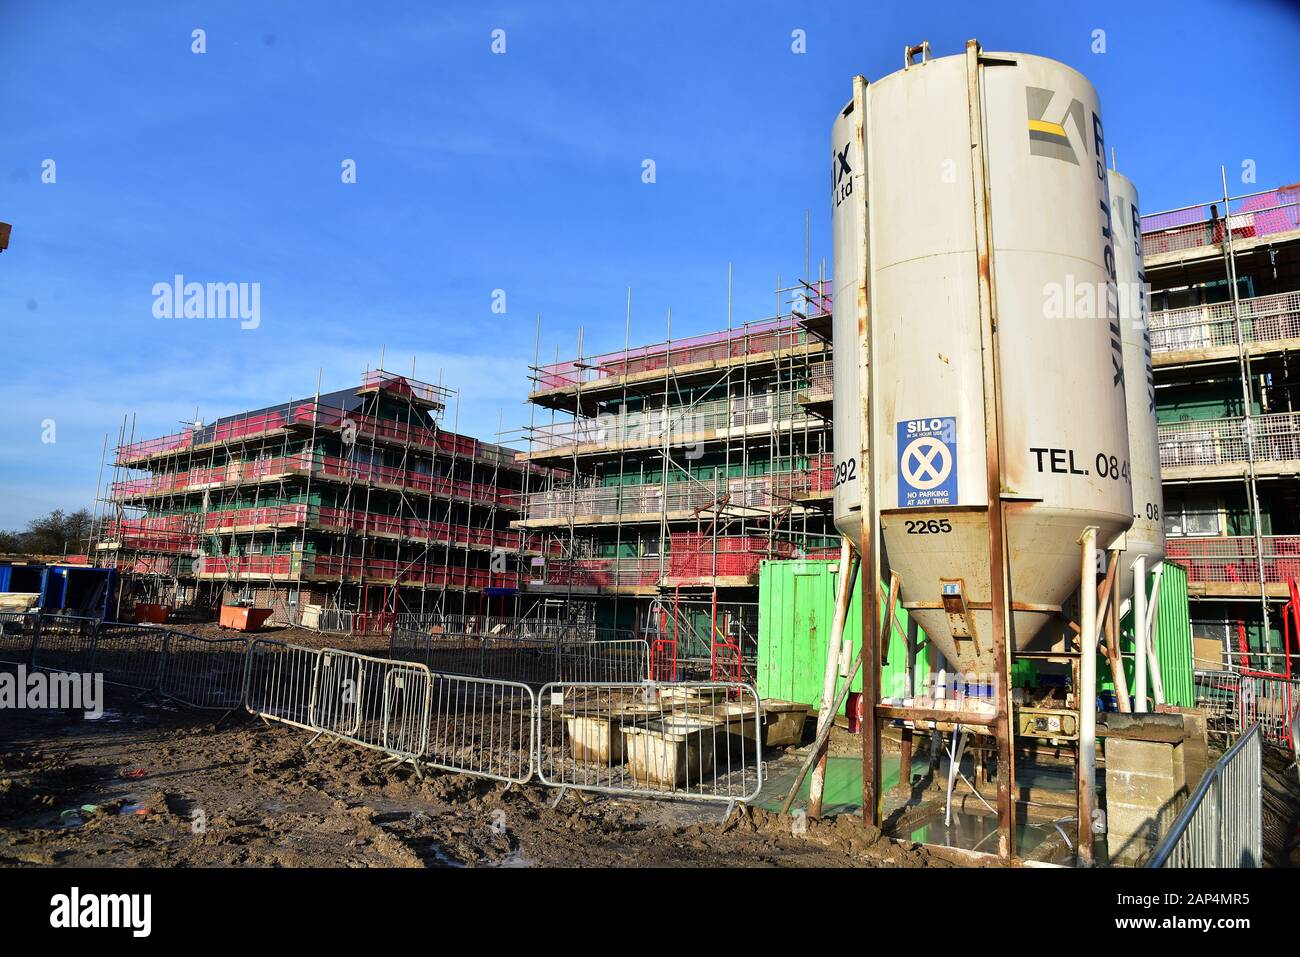 Pictures show a building, construction site of new social housing in Cardiff, South Wales under development. House price story Stock Photo